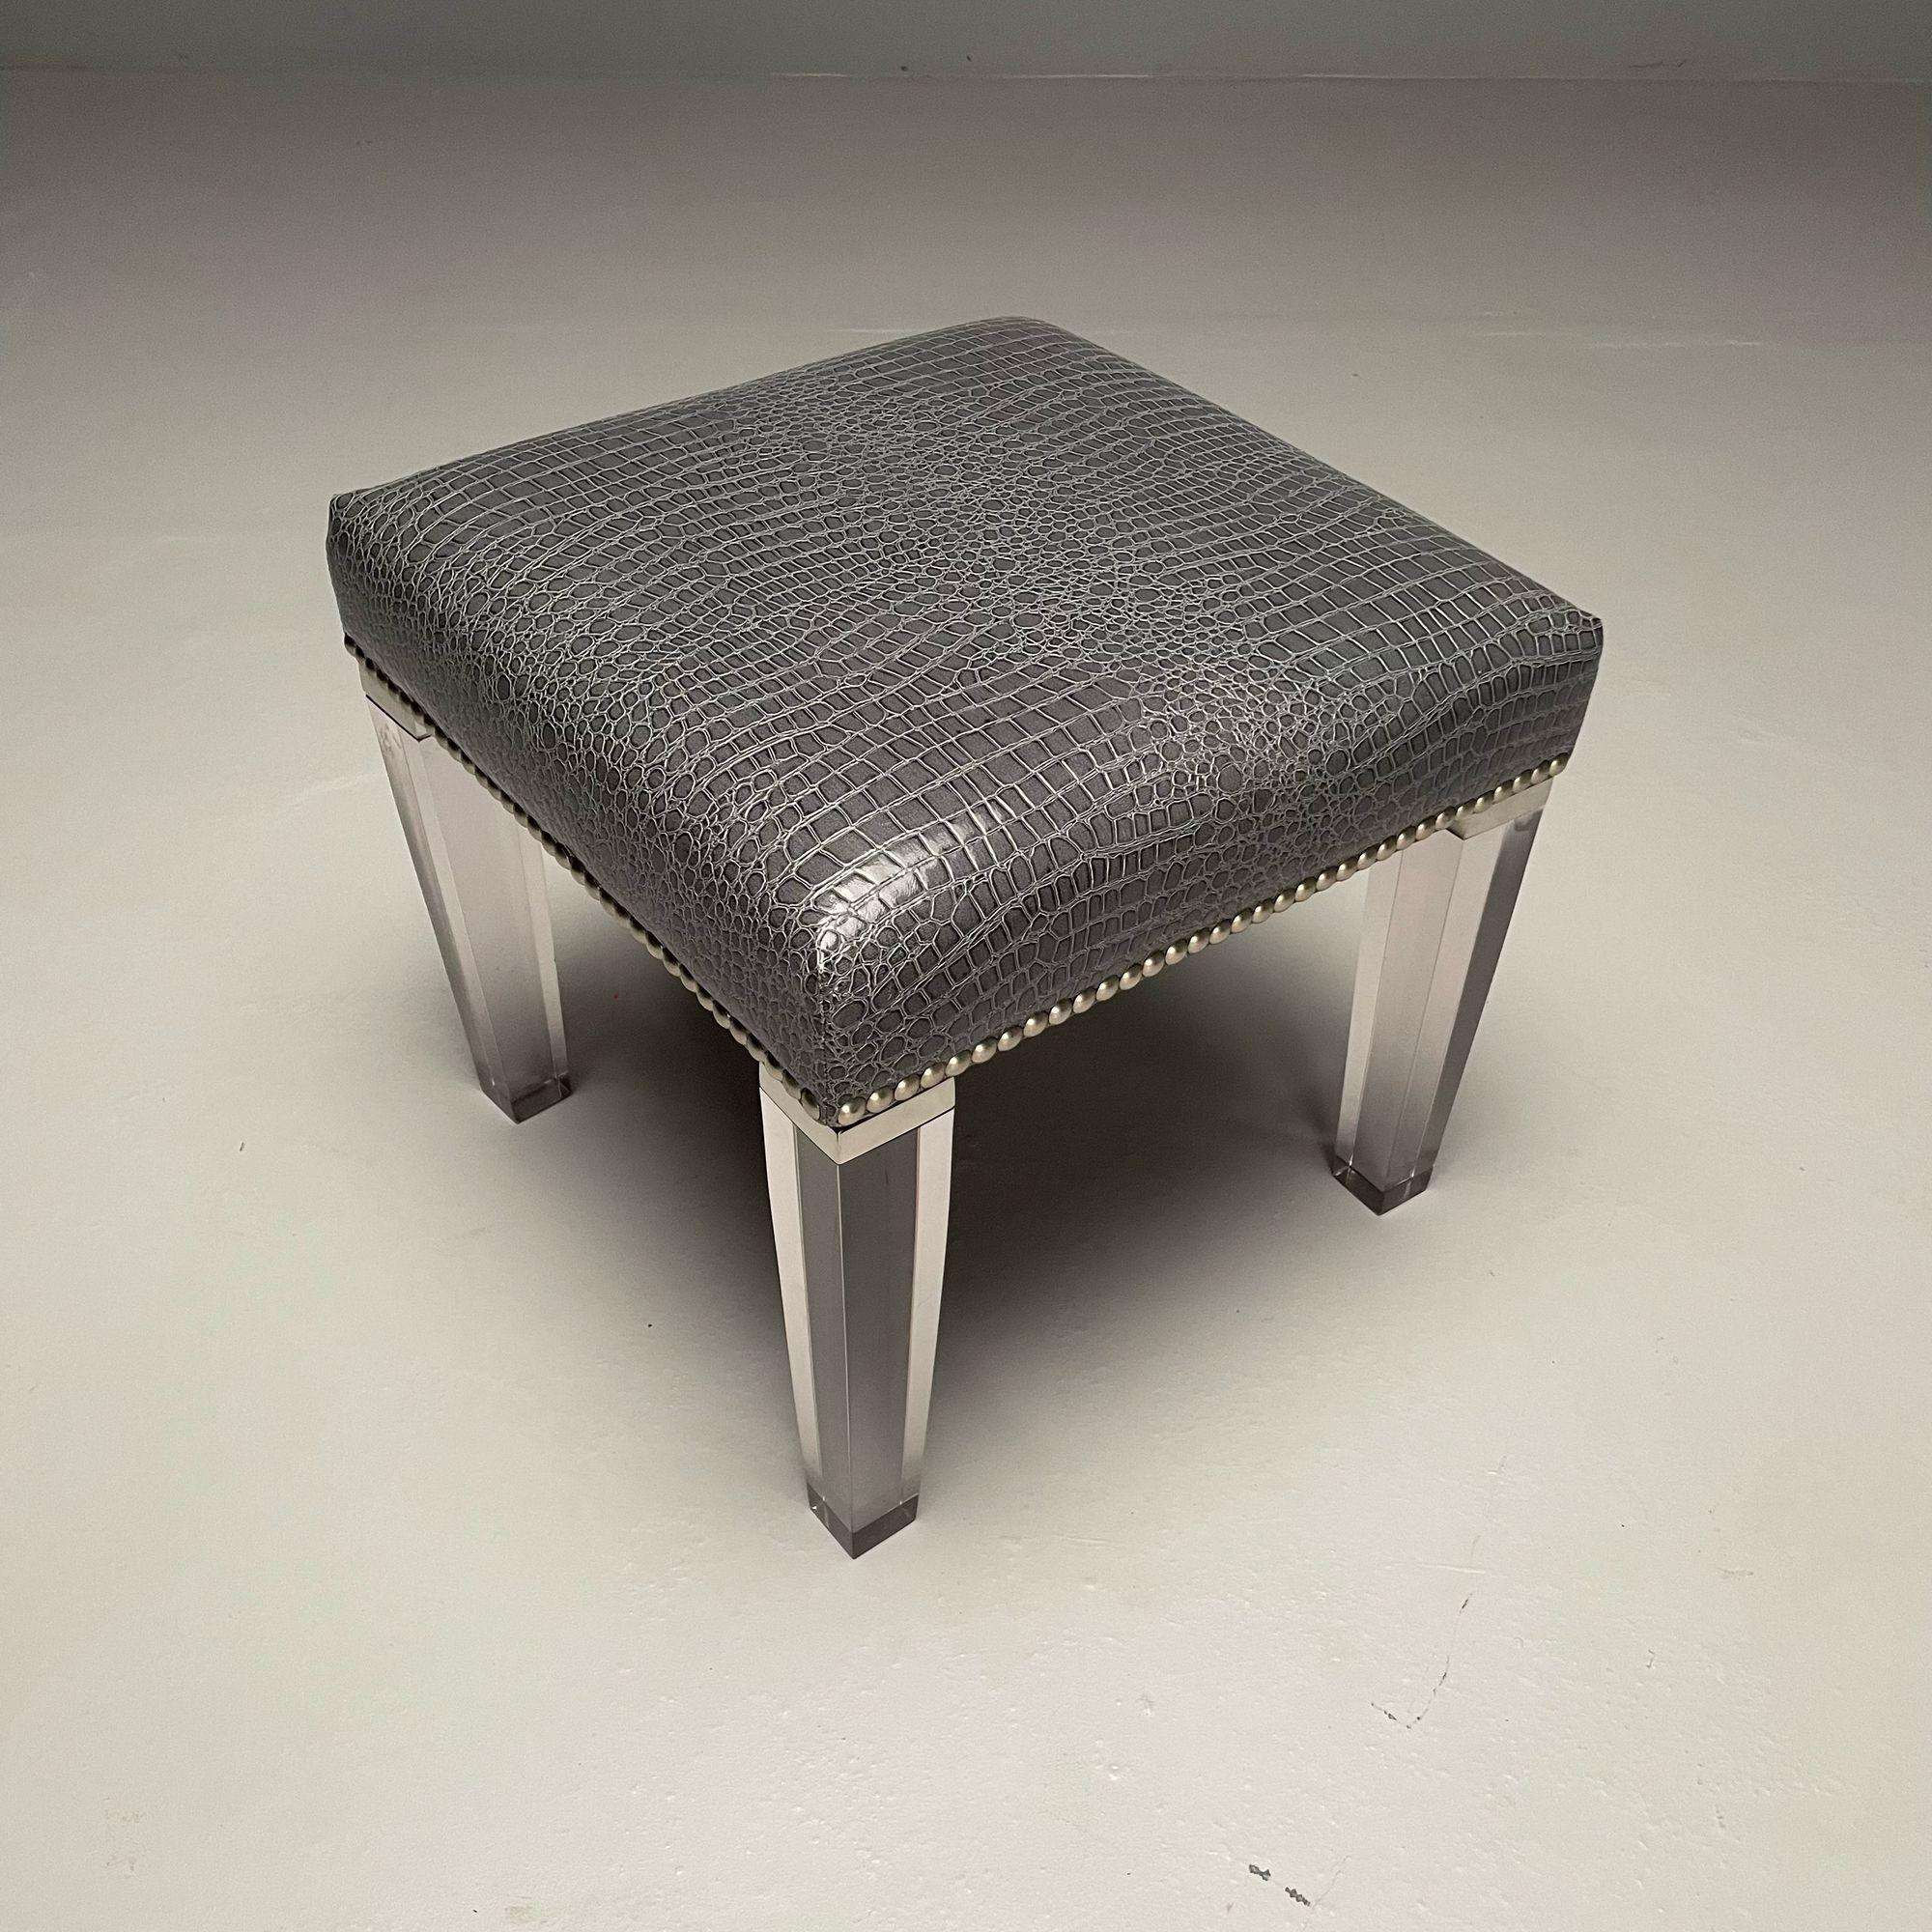 Contemporary, Modern Footstool, Chrome, Acrylic, Faux Snakeskin, 2010s In Good Condition For Sale In Stamford, CT